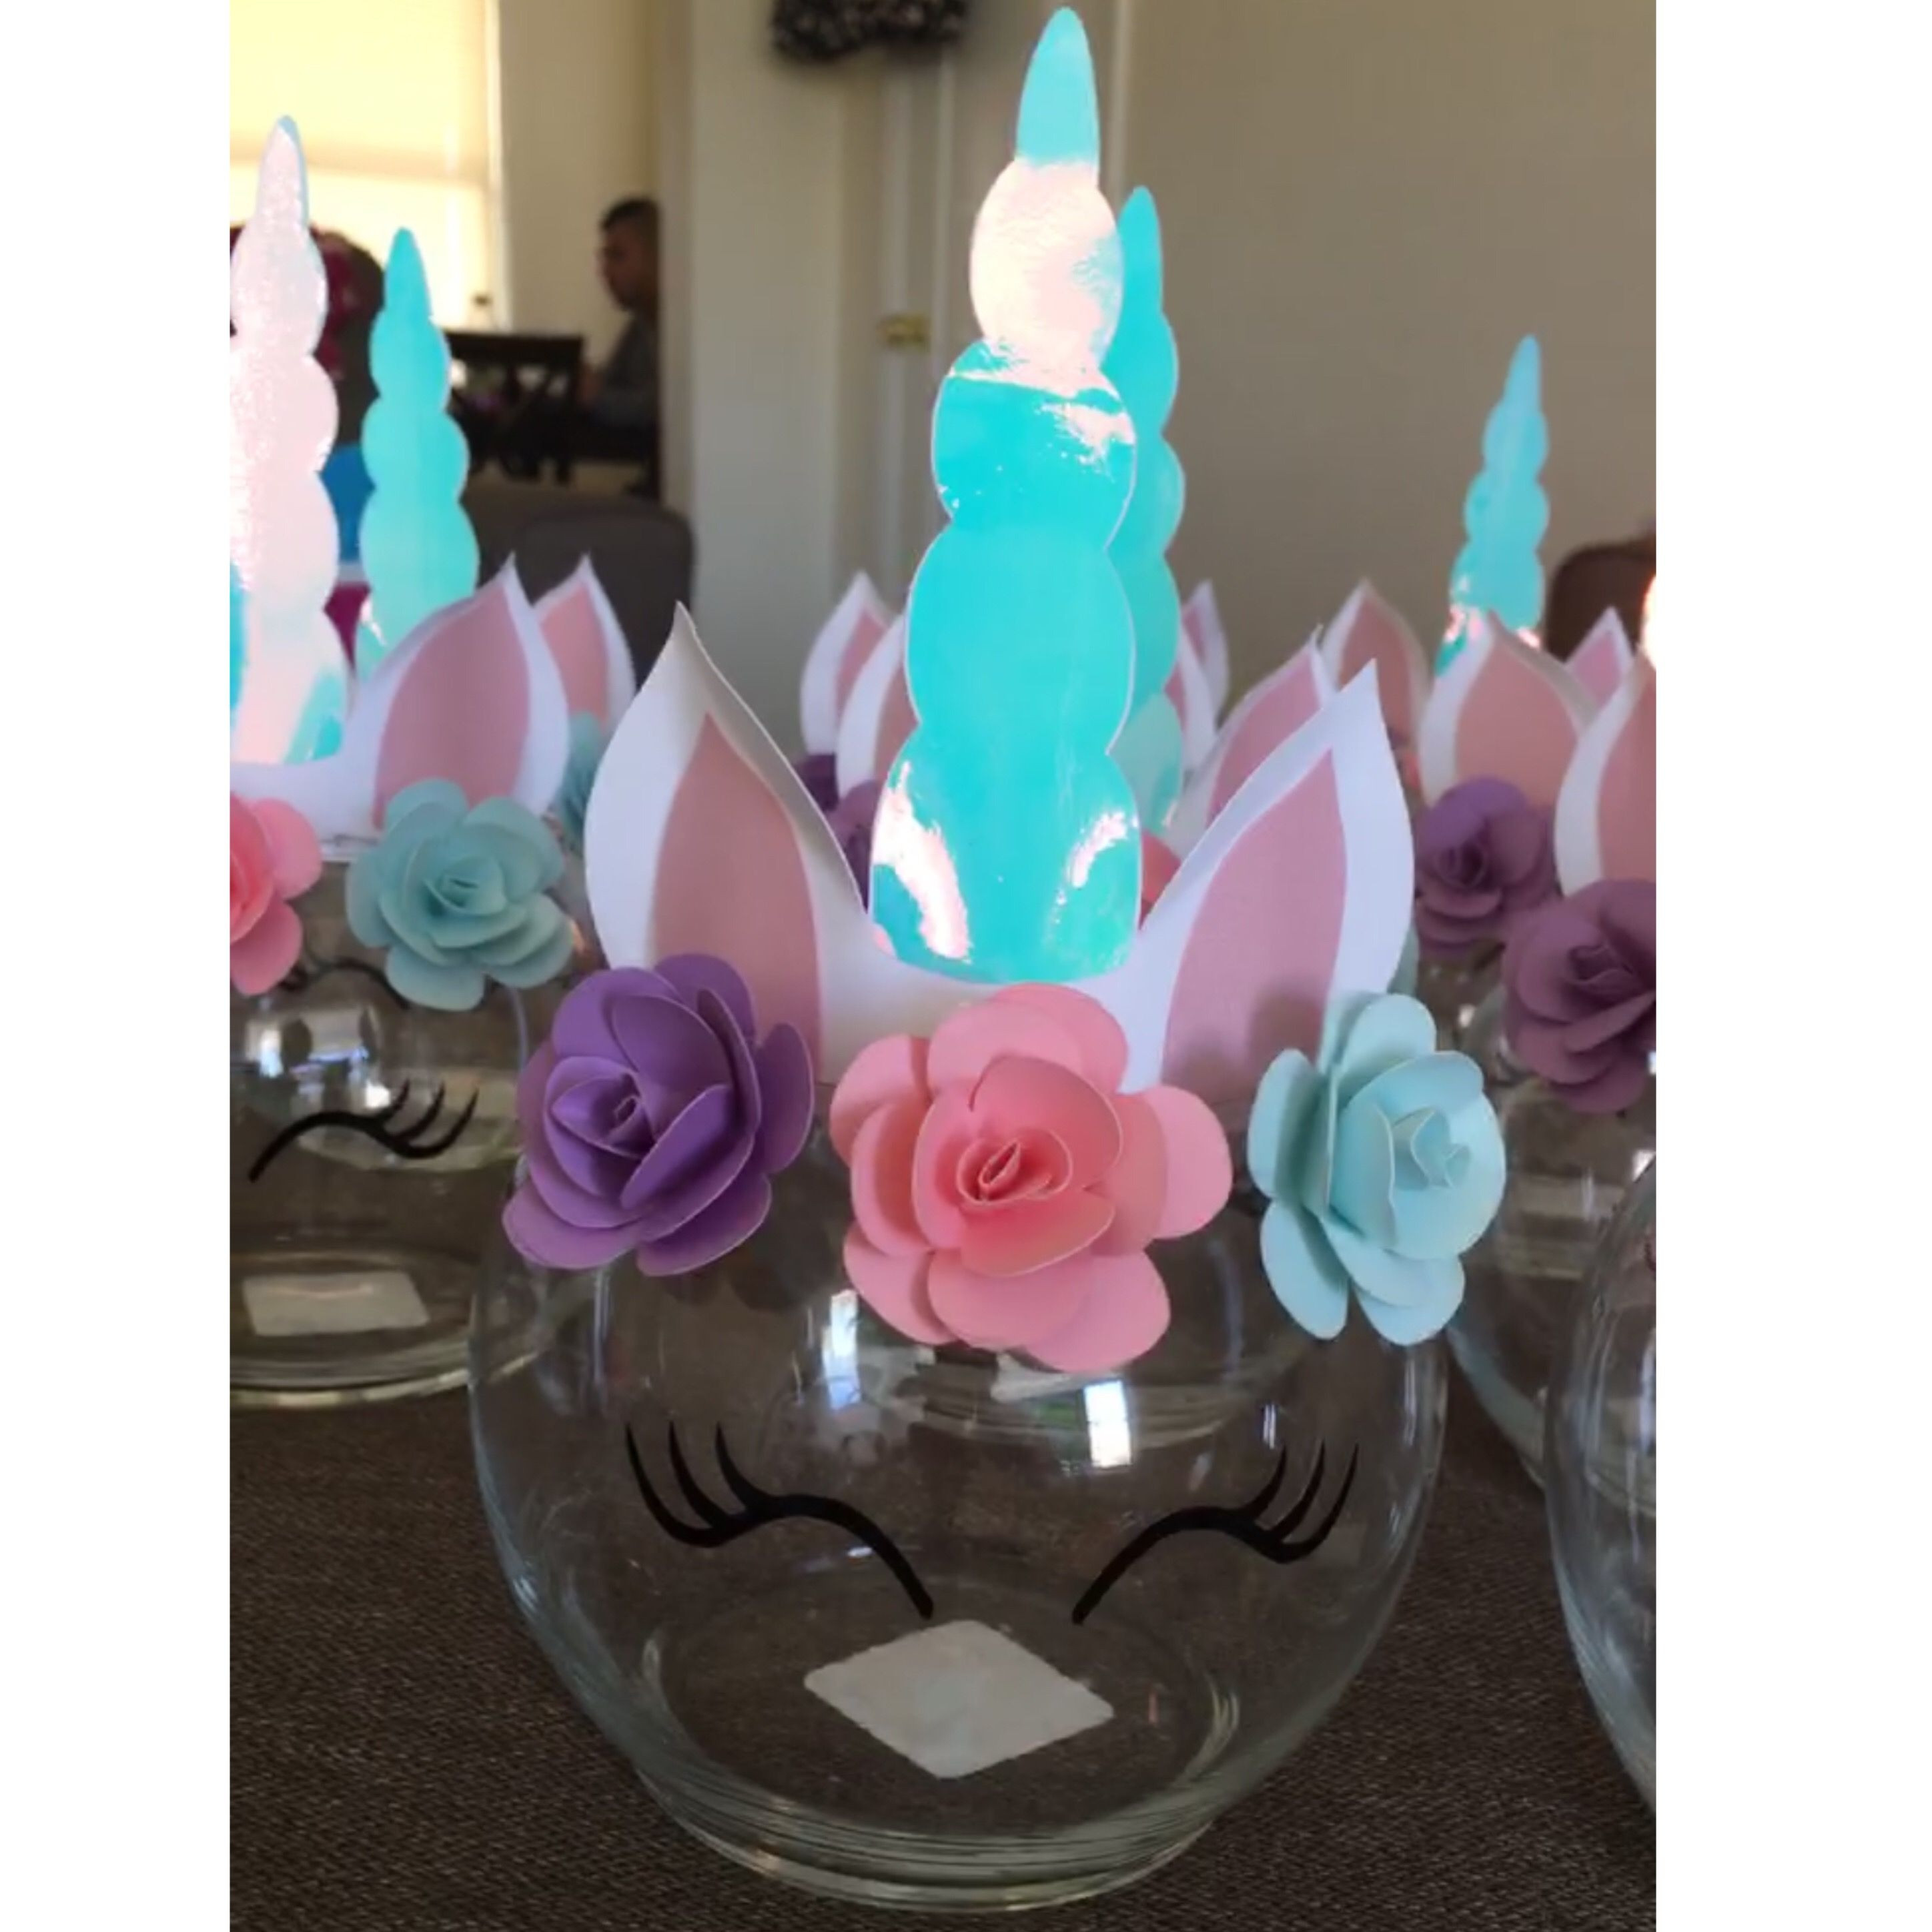 Unicorn Party Centerpiece Ideas
 Made these super cute unicorn centerpiece for my daughters